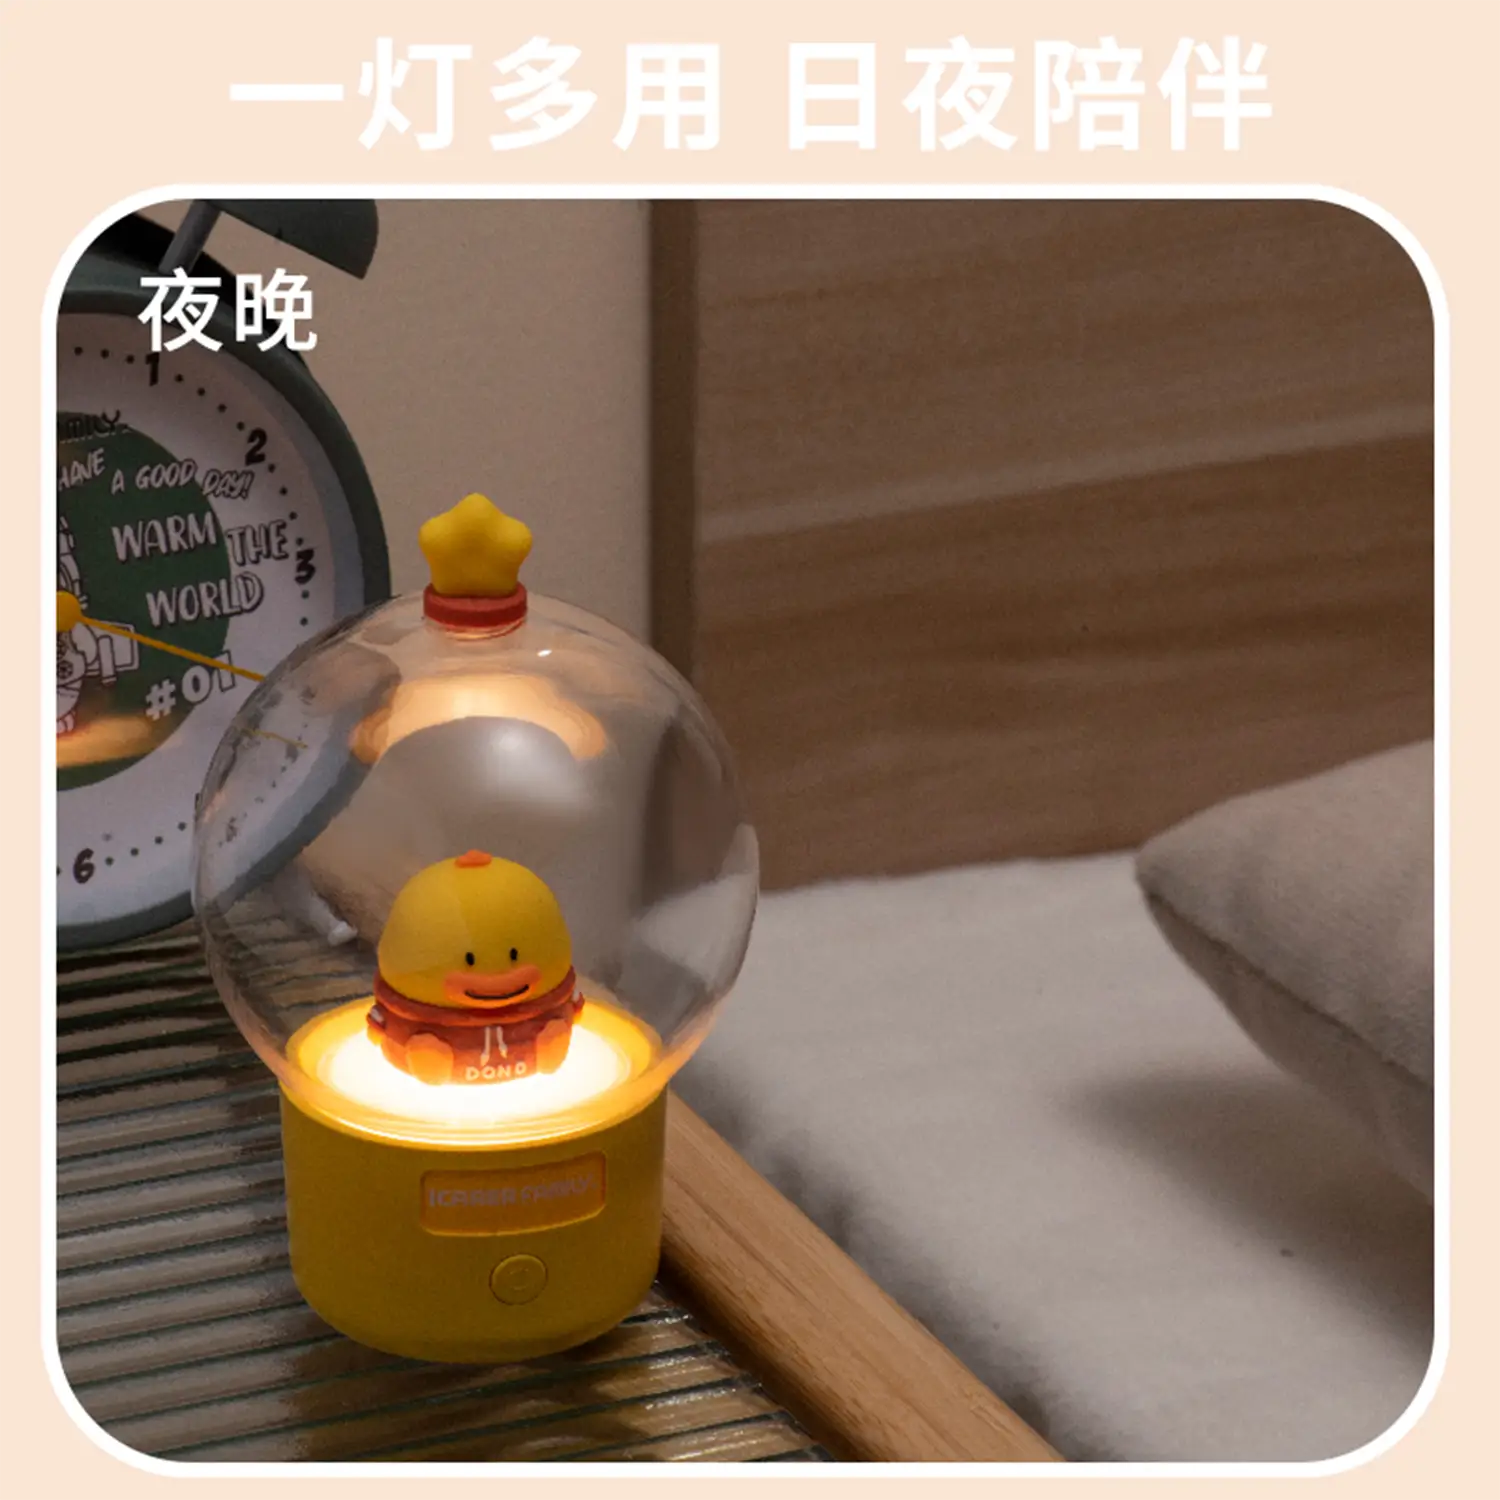 iCarer Family® Glowing Bubble Lamp Night Light Creative Luminous Decoration Touch USB Rechargable, Yellow